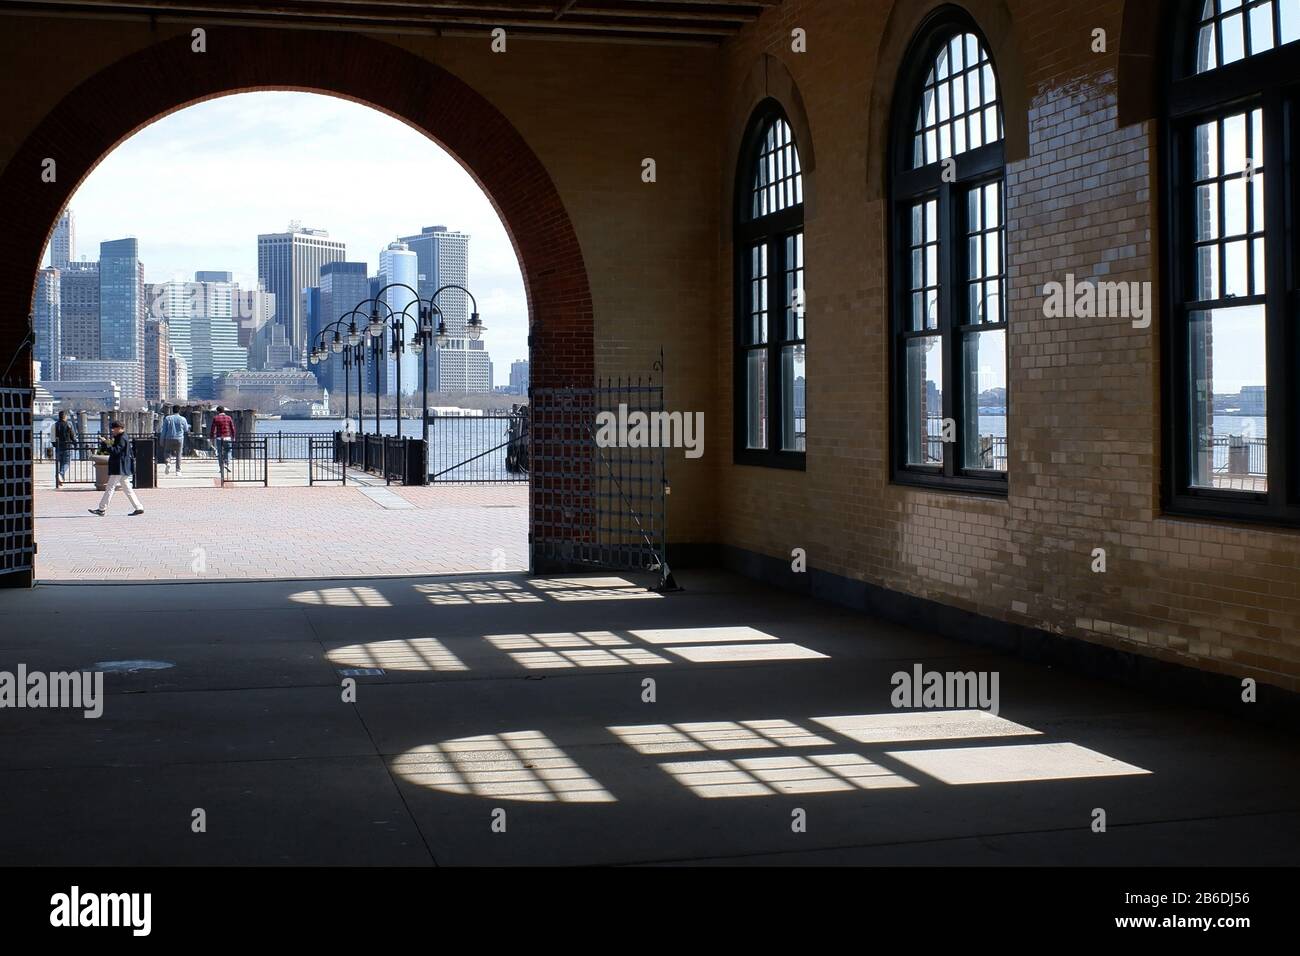 Communipaw Terminal High Resolution Stock Photography and Images - Alamy